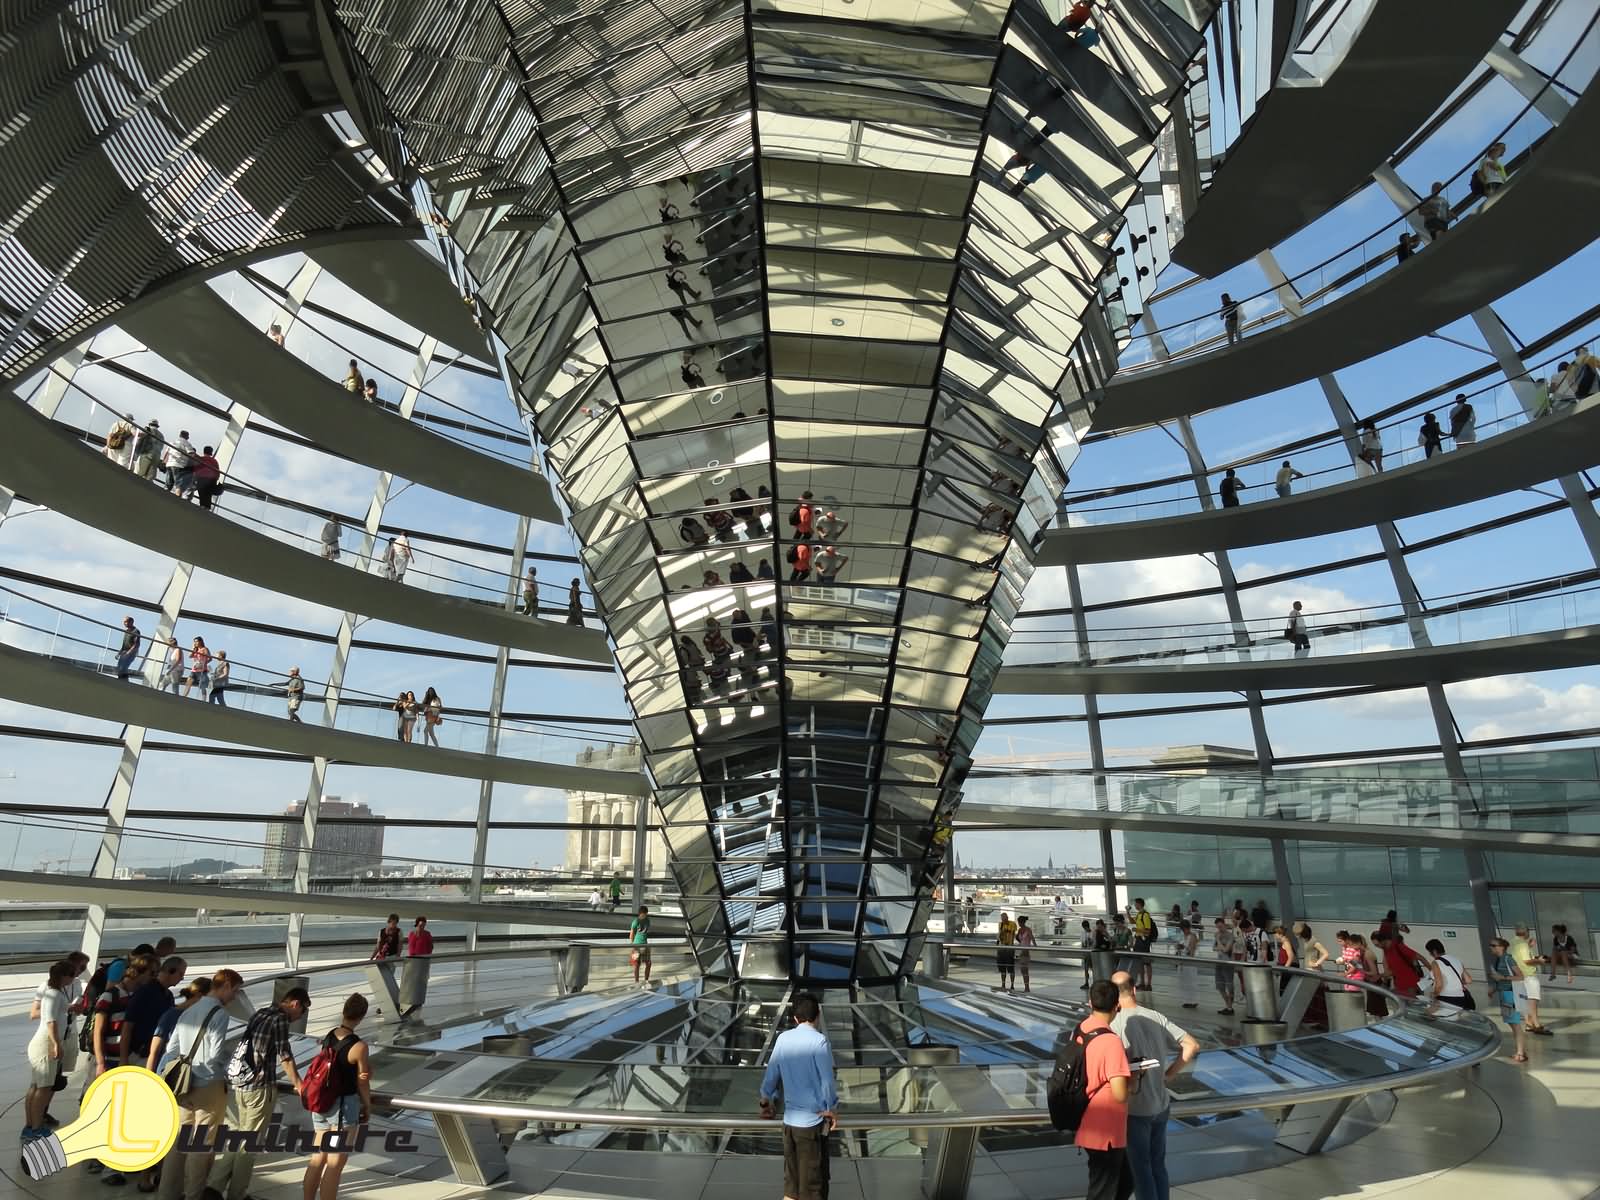 The Reichstag Dome Inteiror View Image